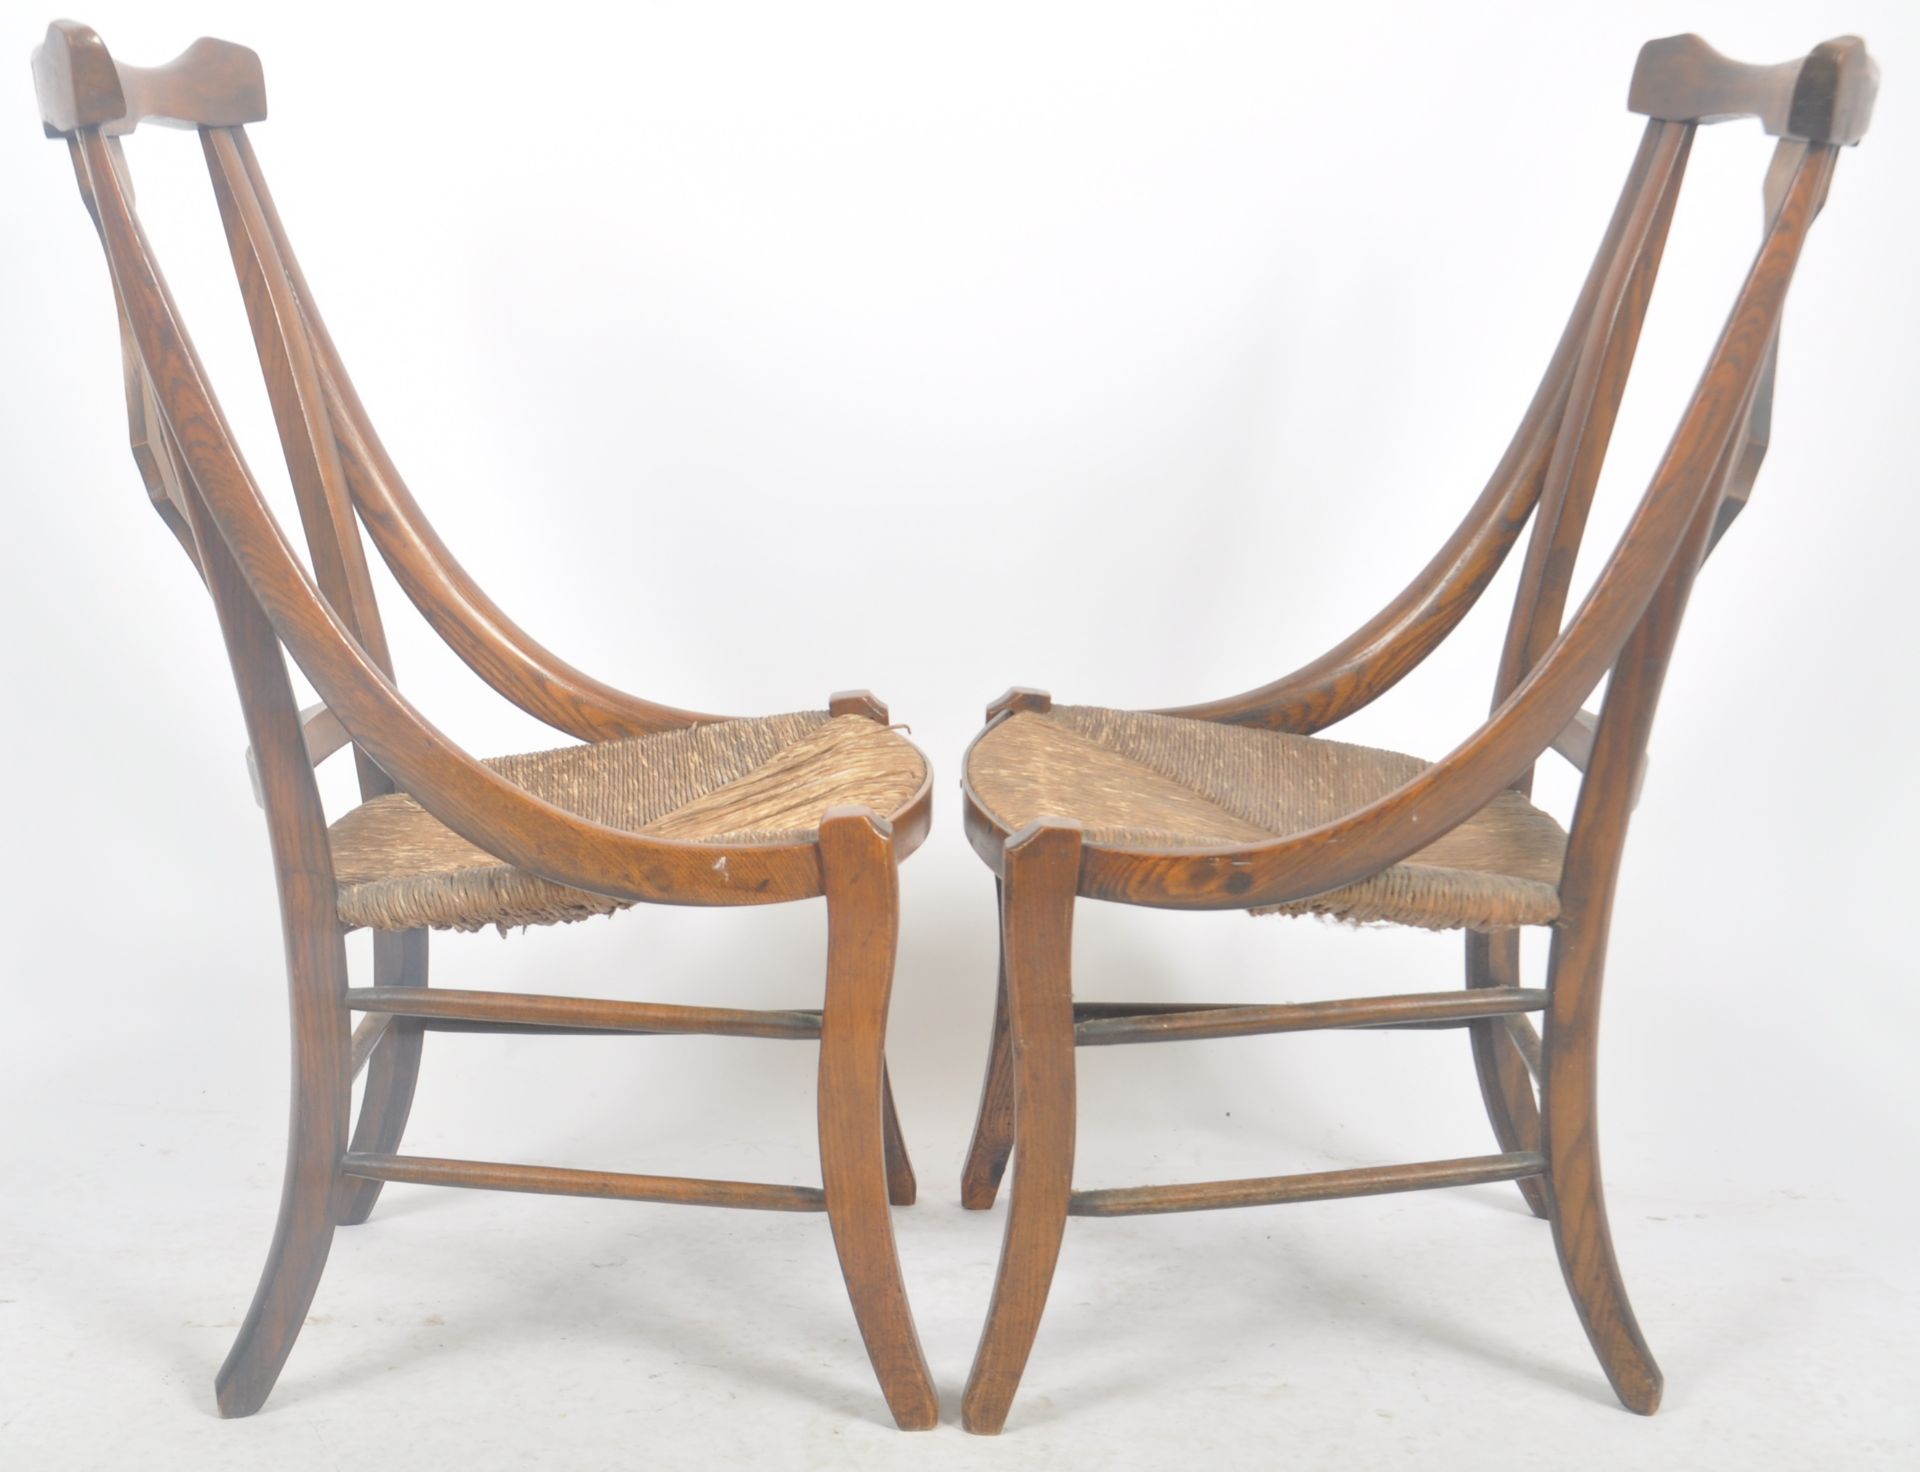 MATCHING PAIR OF ARTS & CRAFTS OAK AND RUSH SEAT CHAIRS - Image 4 of 6